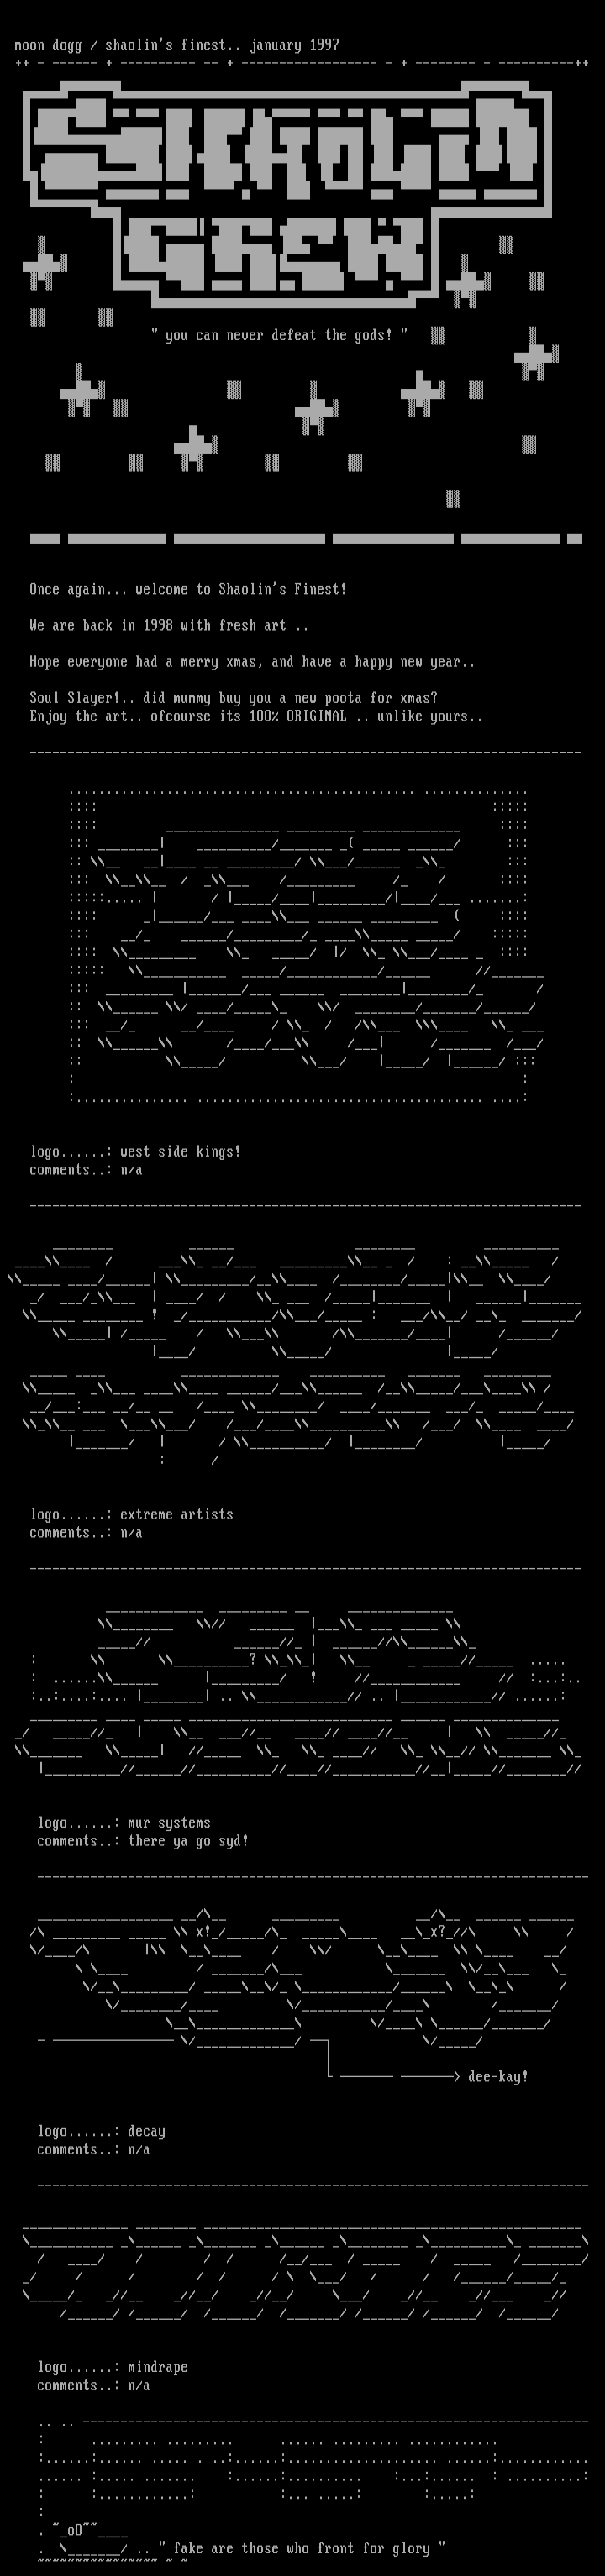 ascii collie [jan 98] by moon dogg! [mD]